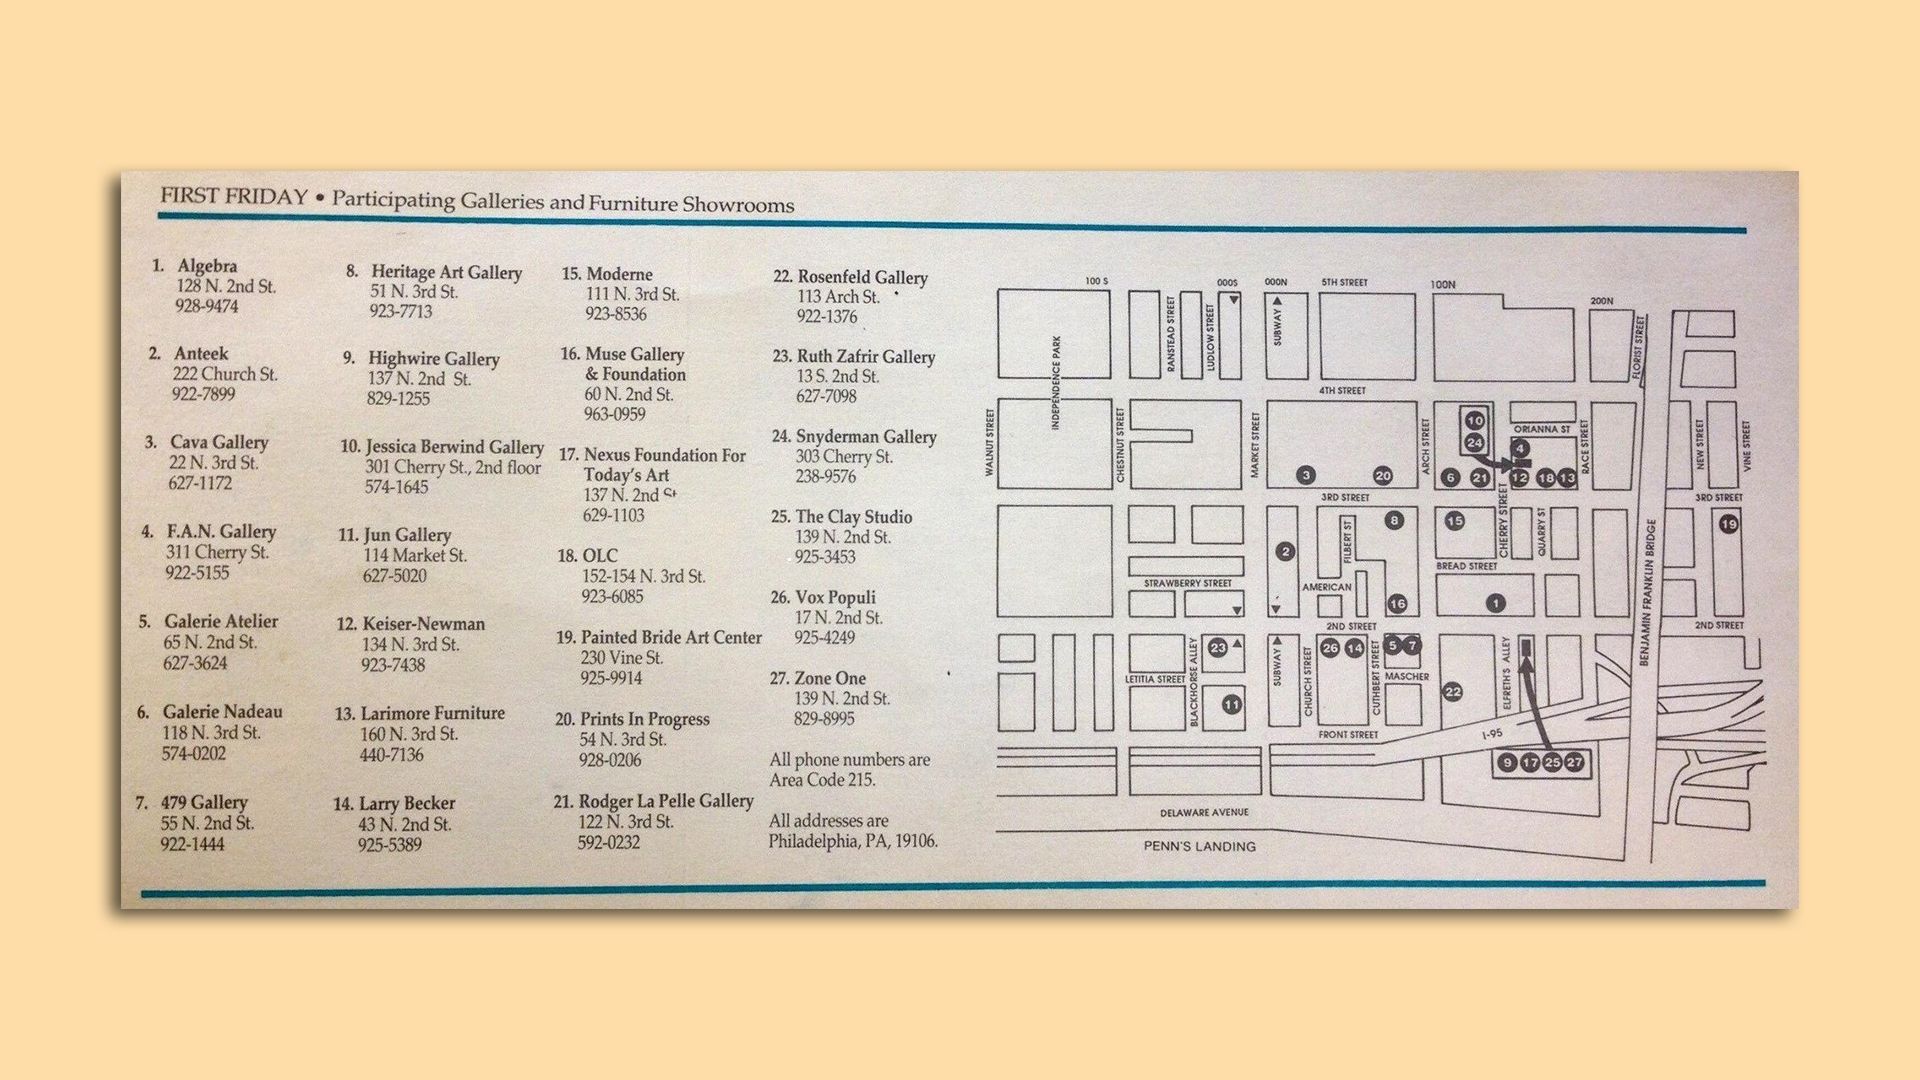 One of the original First Friday maps from 1991. Photo courtesy of Old City District 